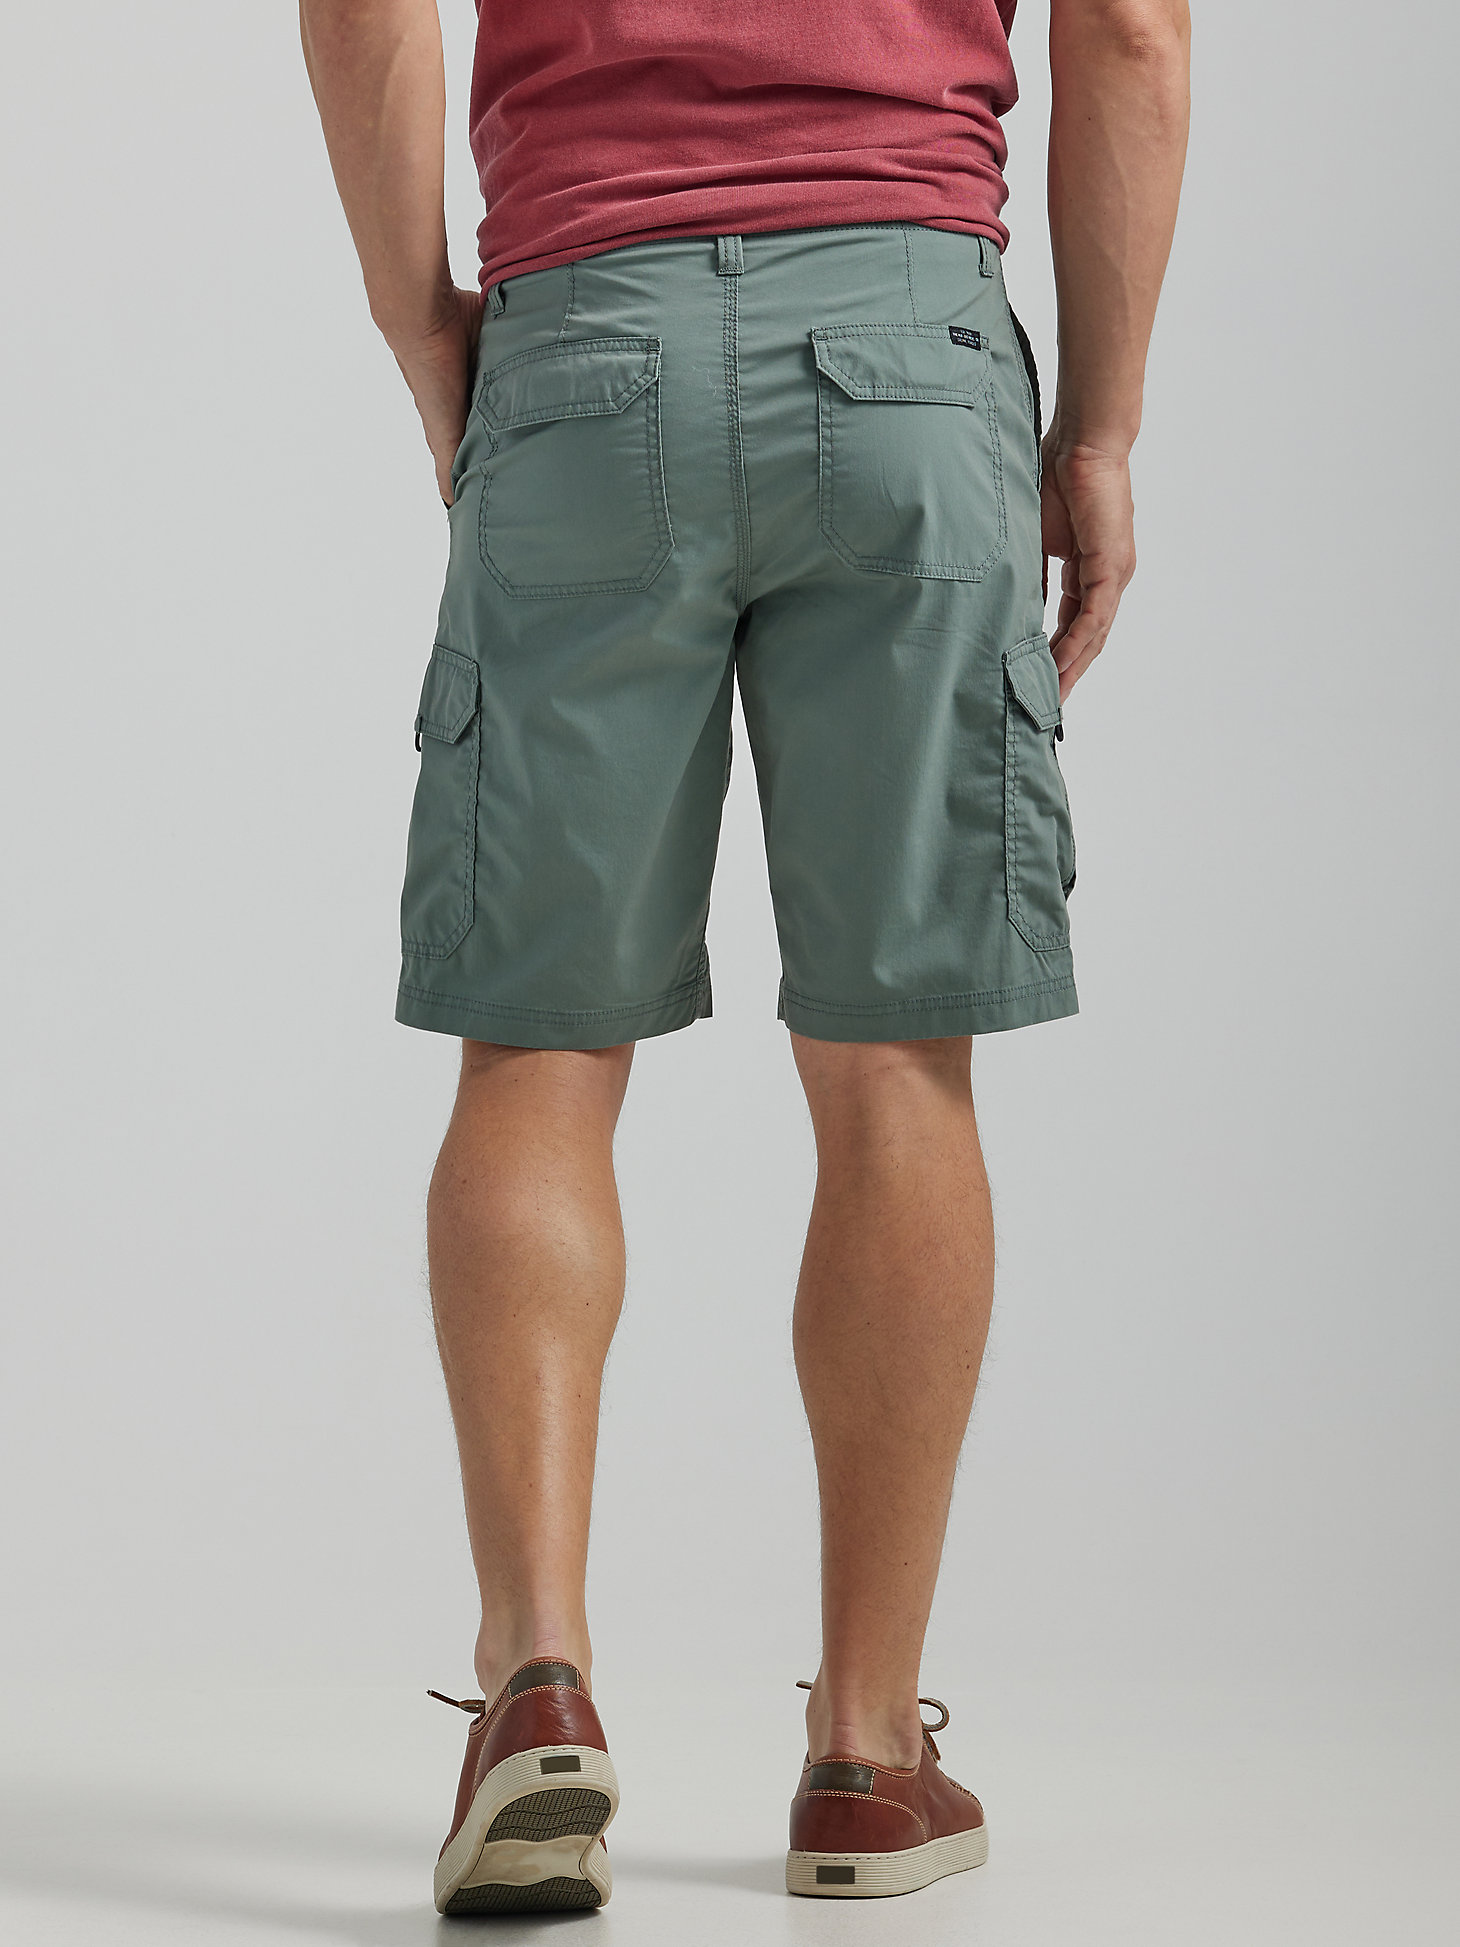 Men's Extreme Motion Crossroads Short in Fort Green alternative view 1